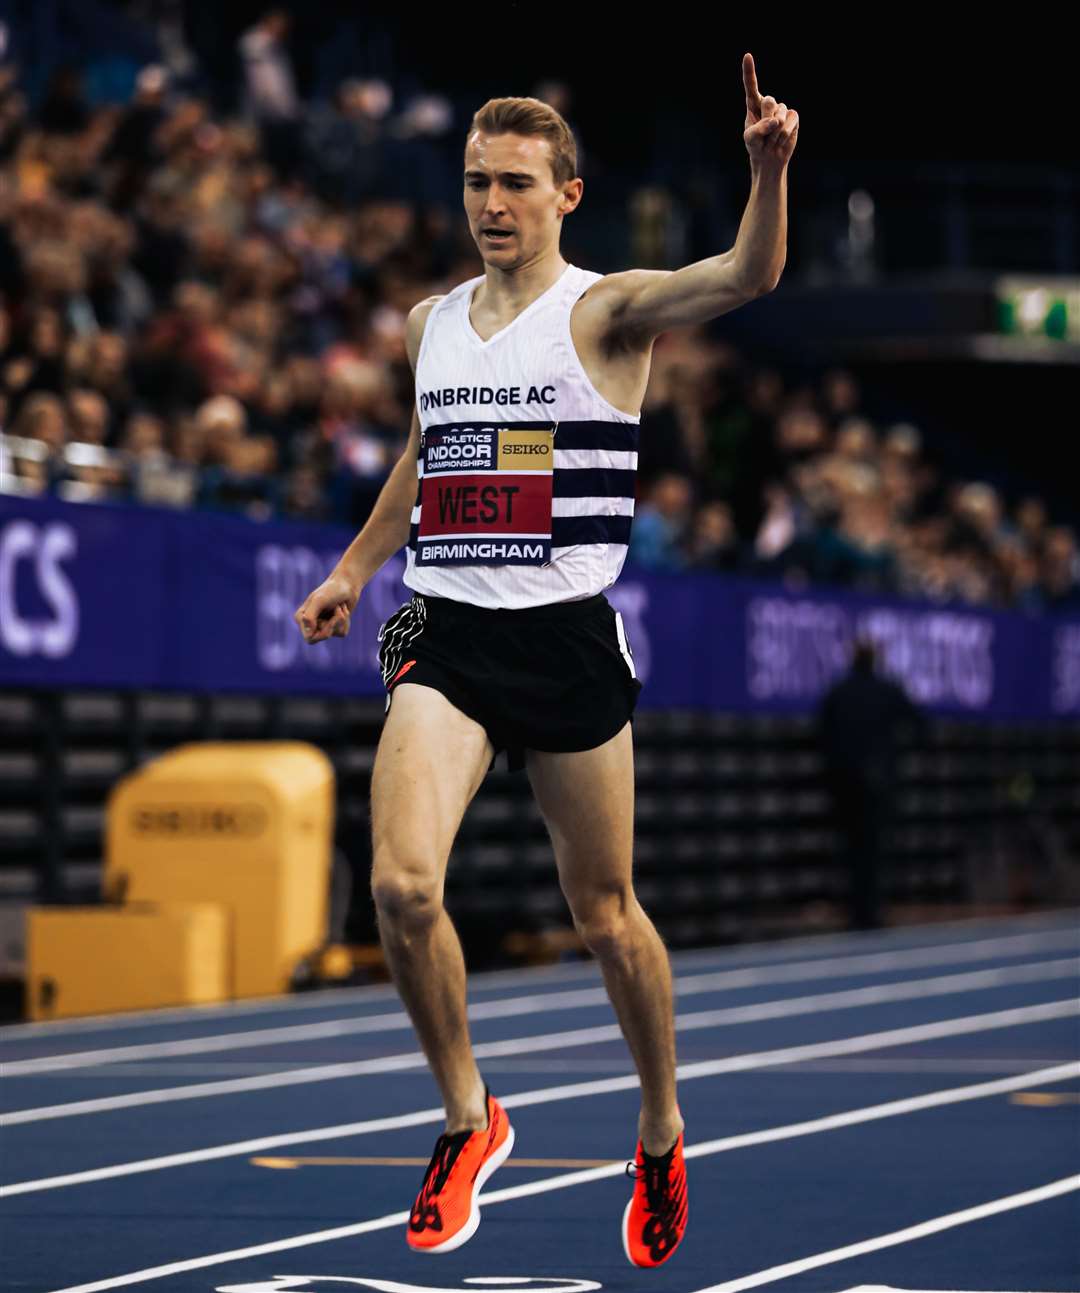 James West of Tonbridge Athletic Club won at the British Indoor Athletics Championship in the 3,000m race. Picture: Julie Fuster